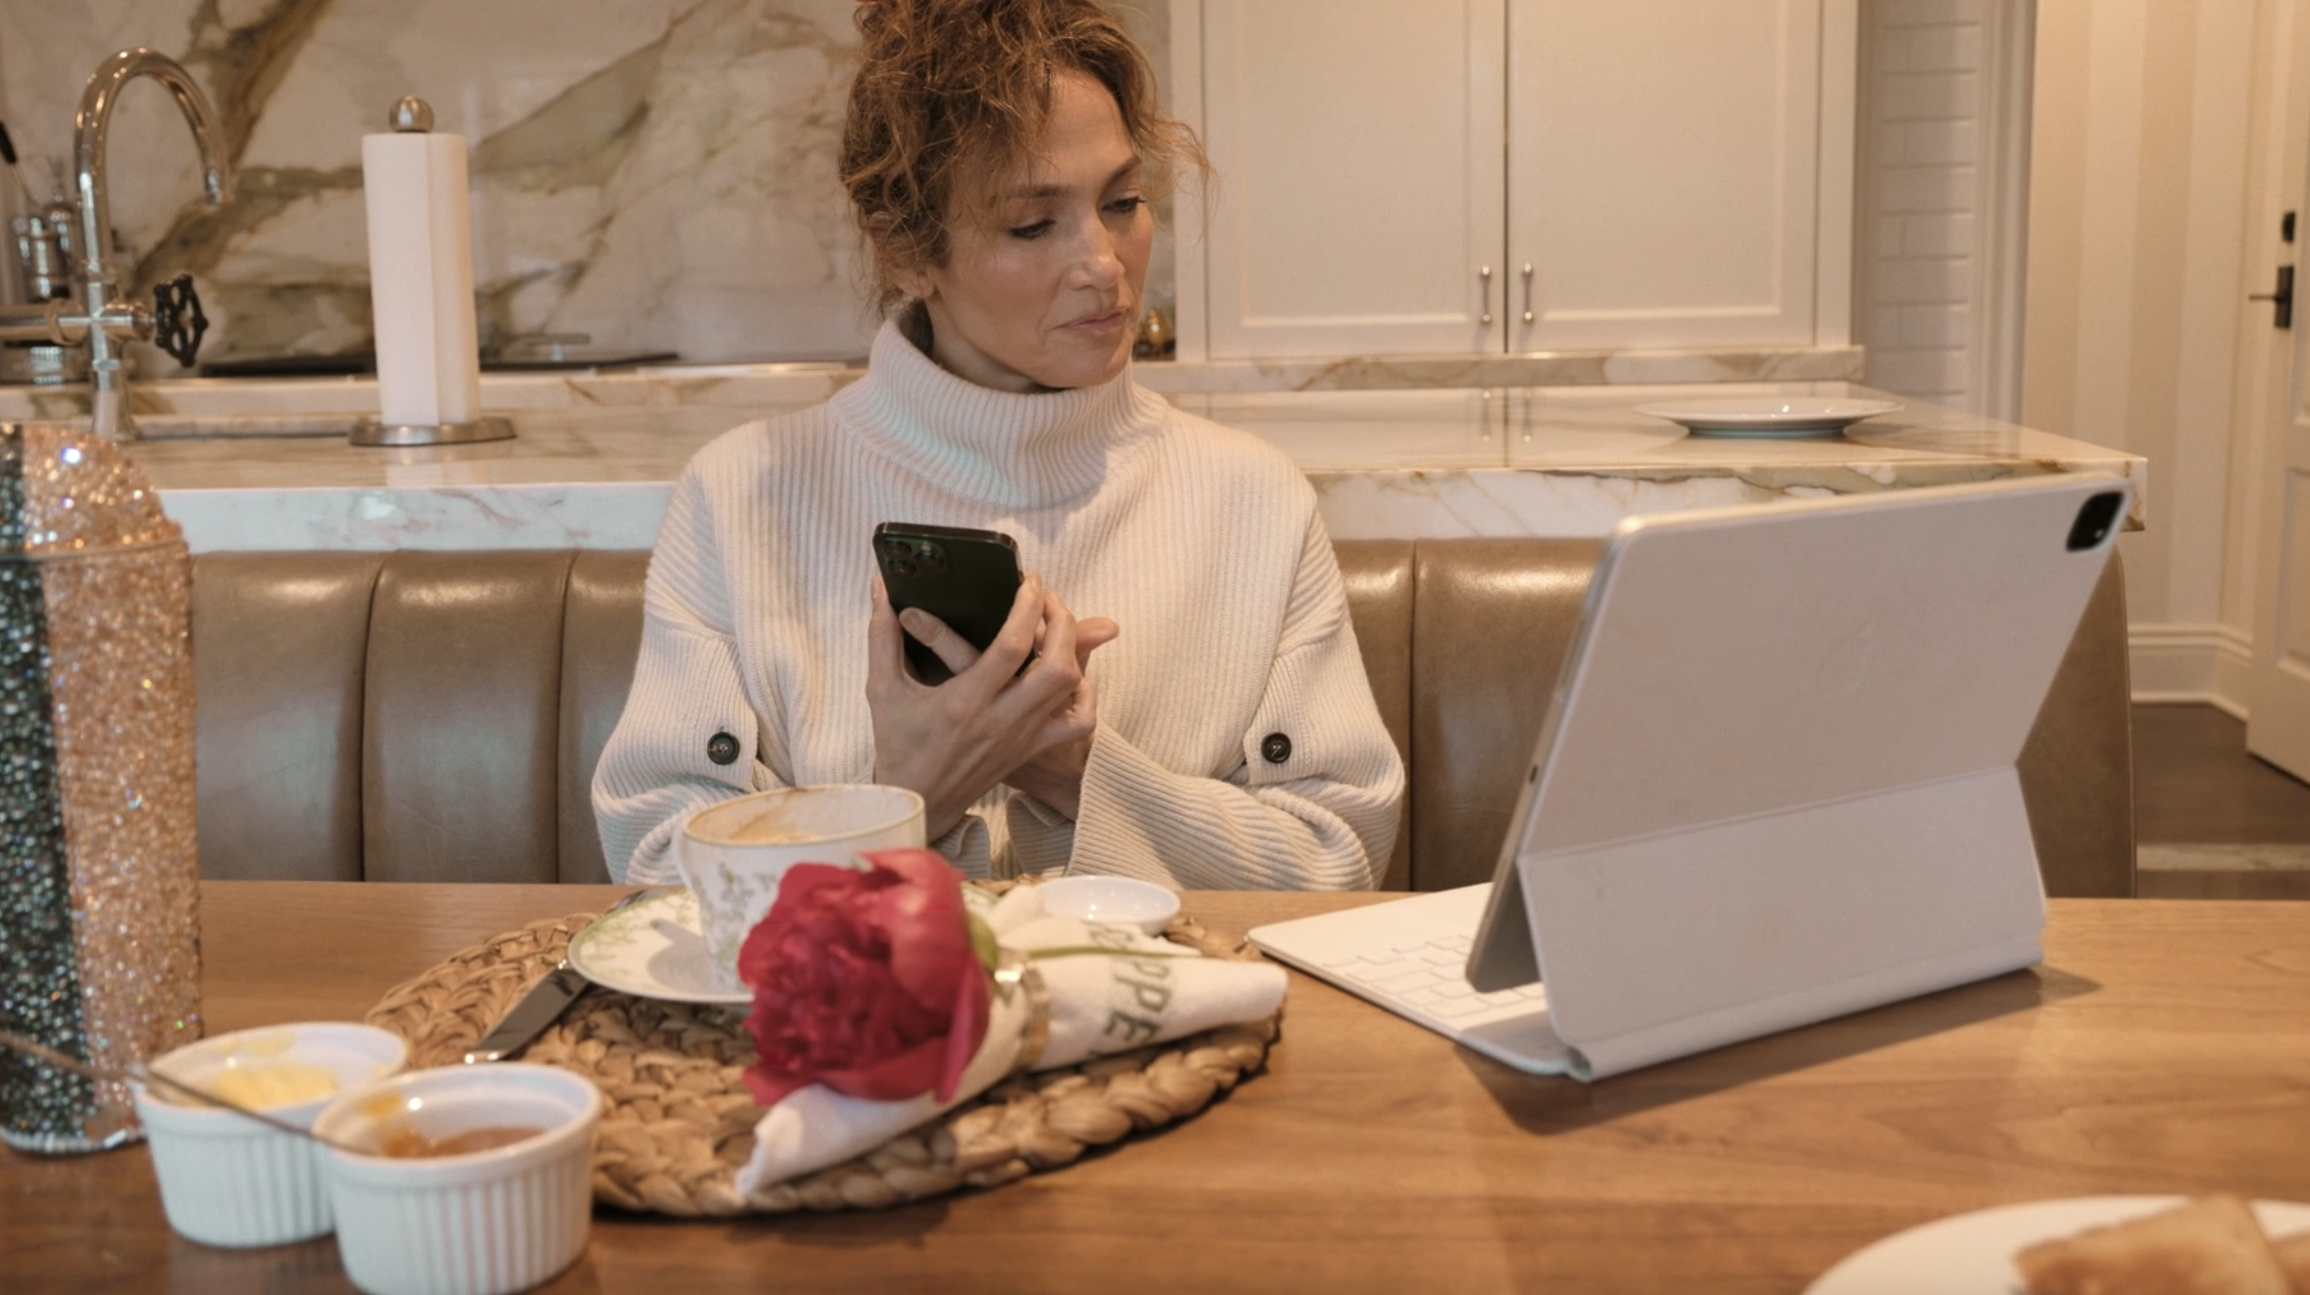 Jennifer in a turtleneck sweater speaking on the as she looks at a tablet on the table